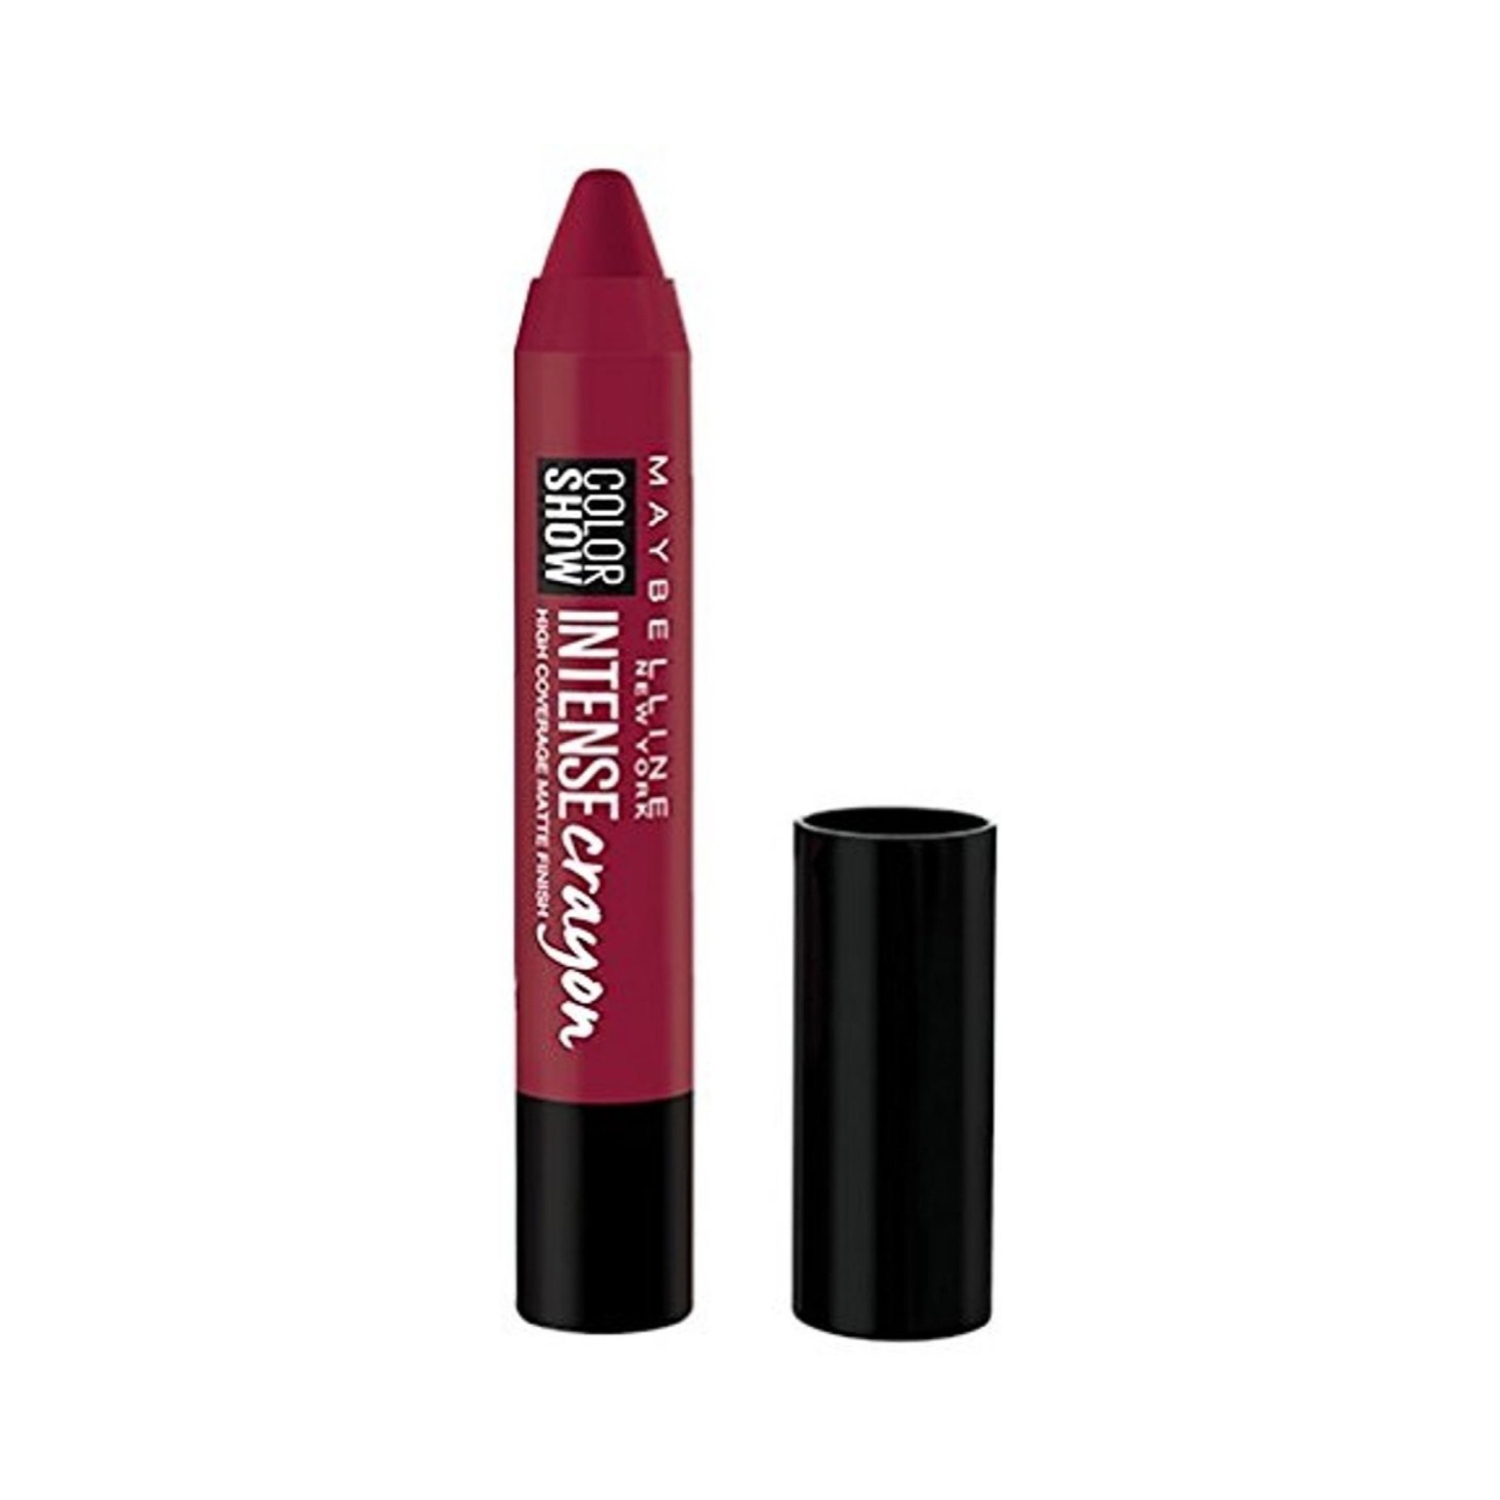 Maybelline New York | Maybelline New York Color Show Intense Lip Crayon SPF 17 - Passionate Plum (3.5g)